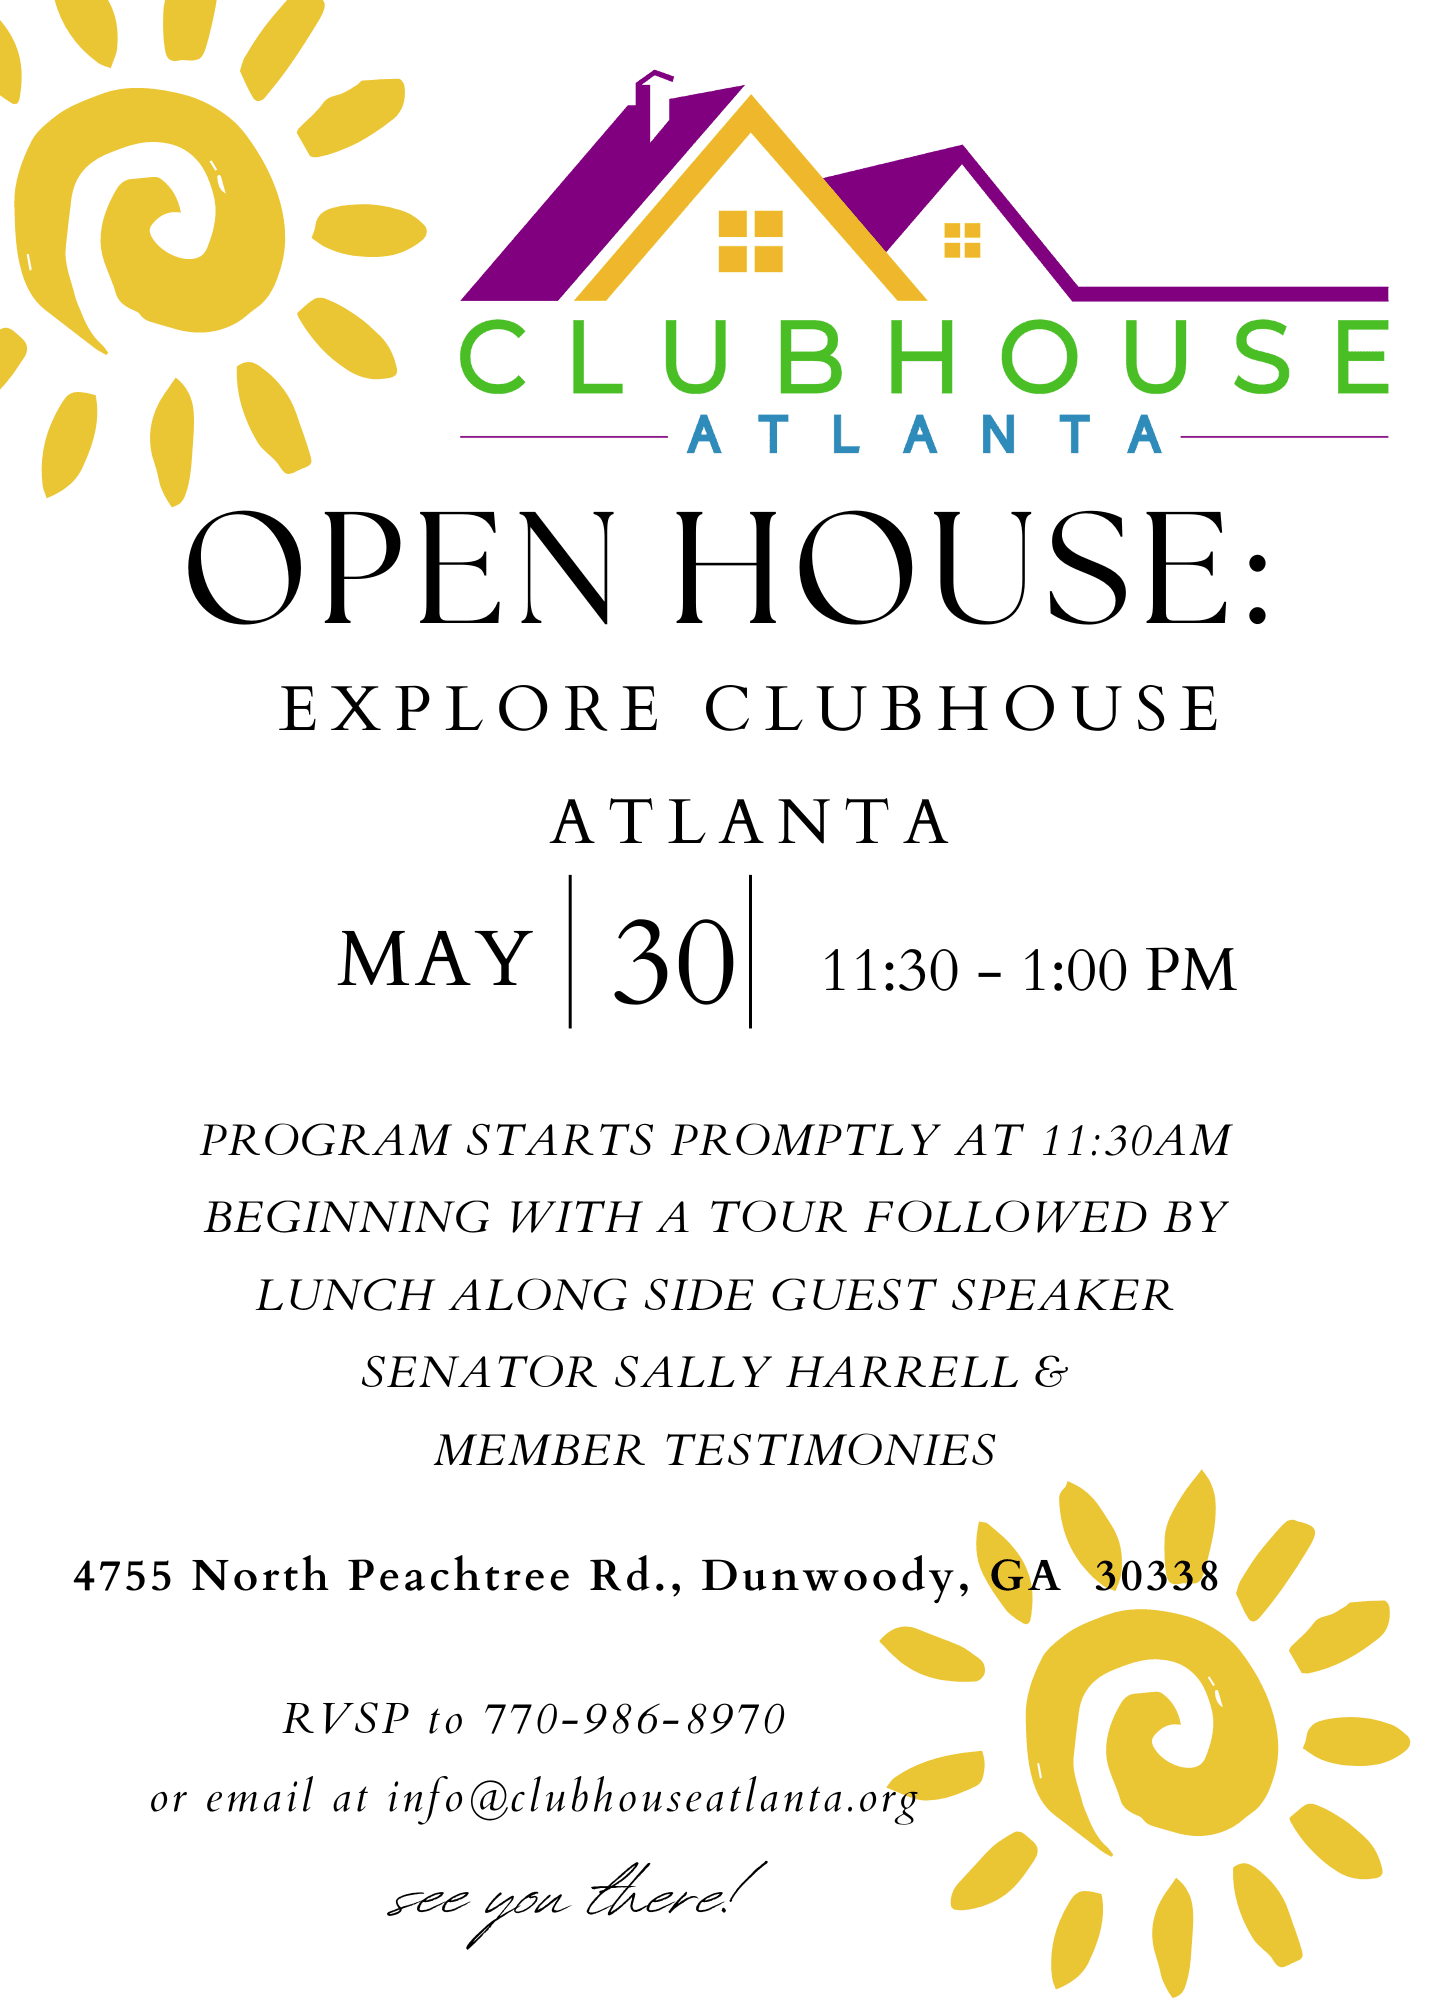 Clubhouse Atlanta Open House: Discover firsthand the transformative work we do to support mental health.